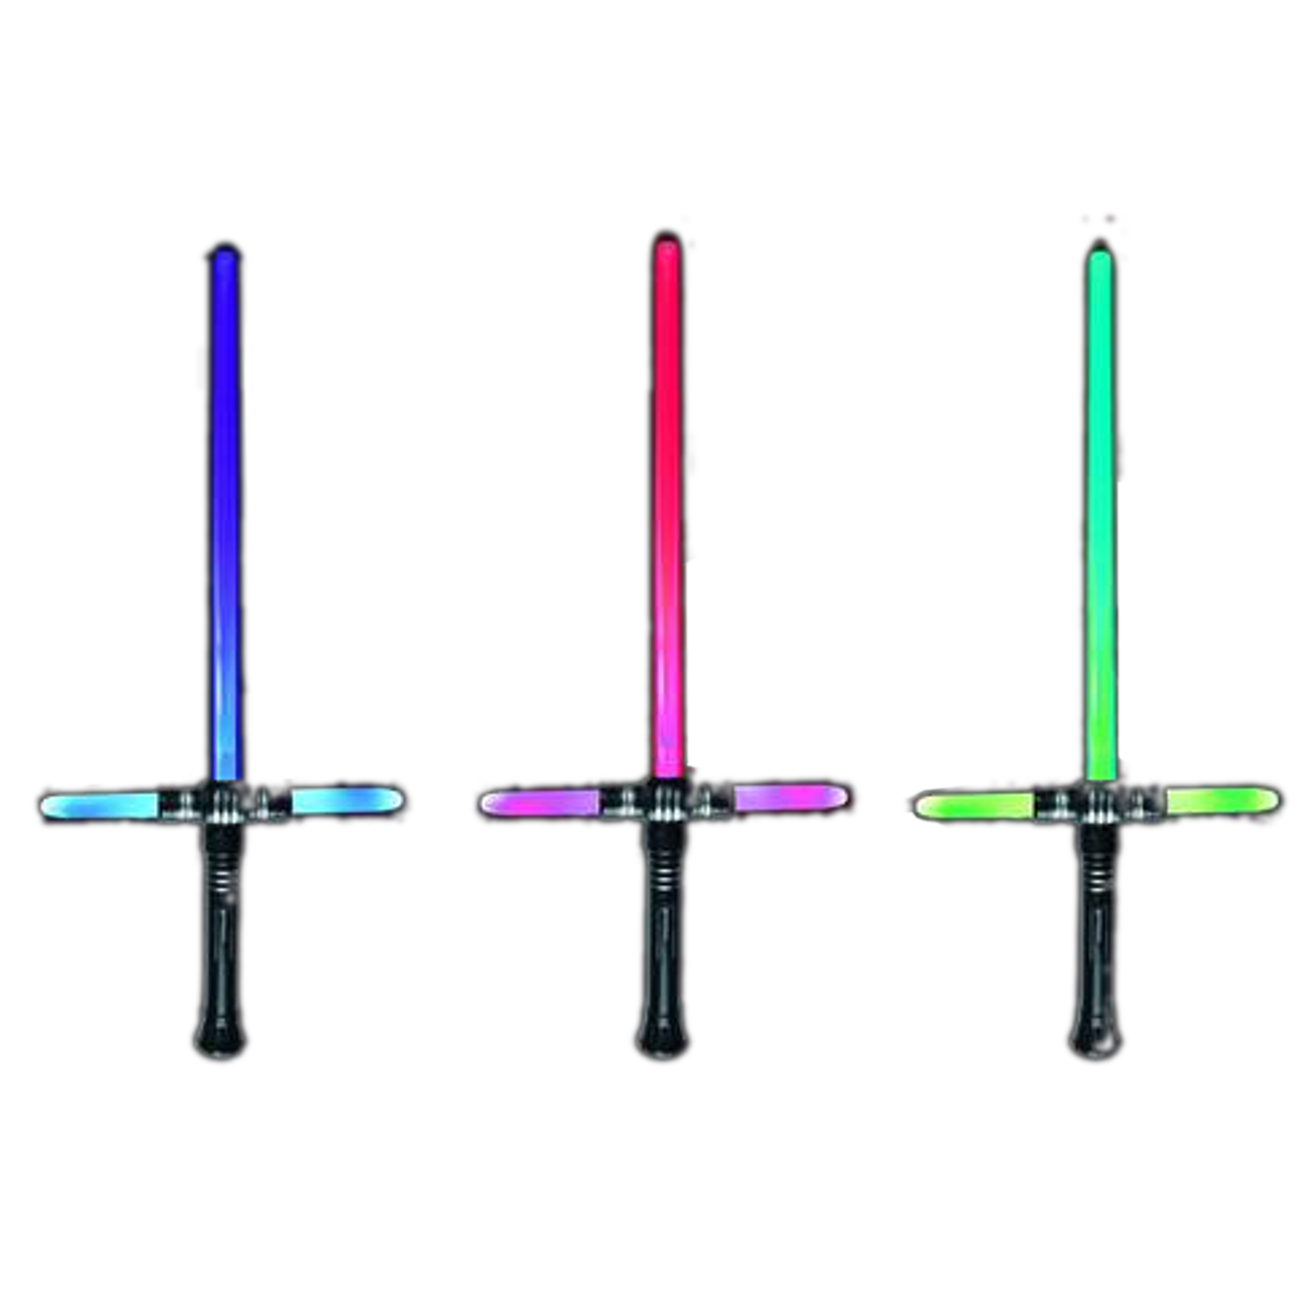 Star Wars Cross Guard Lightsabers Multicolor All Products